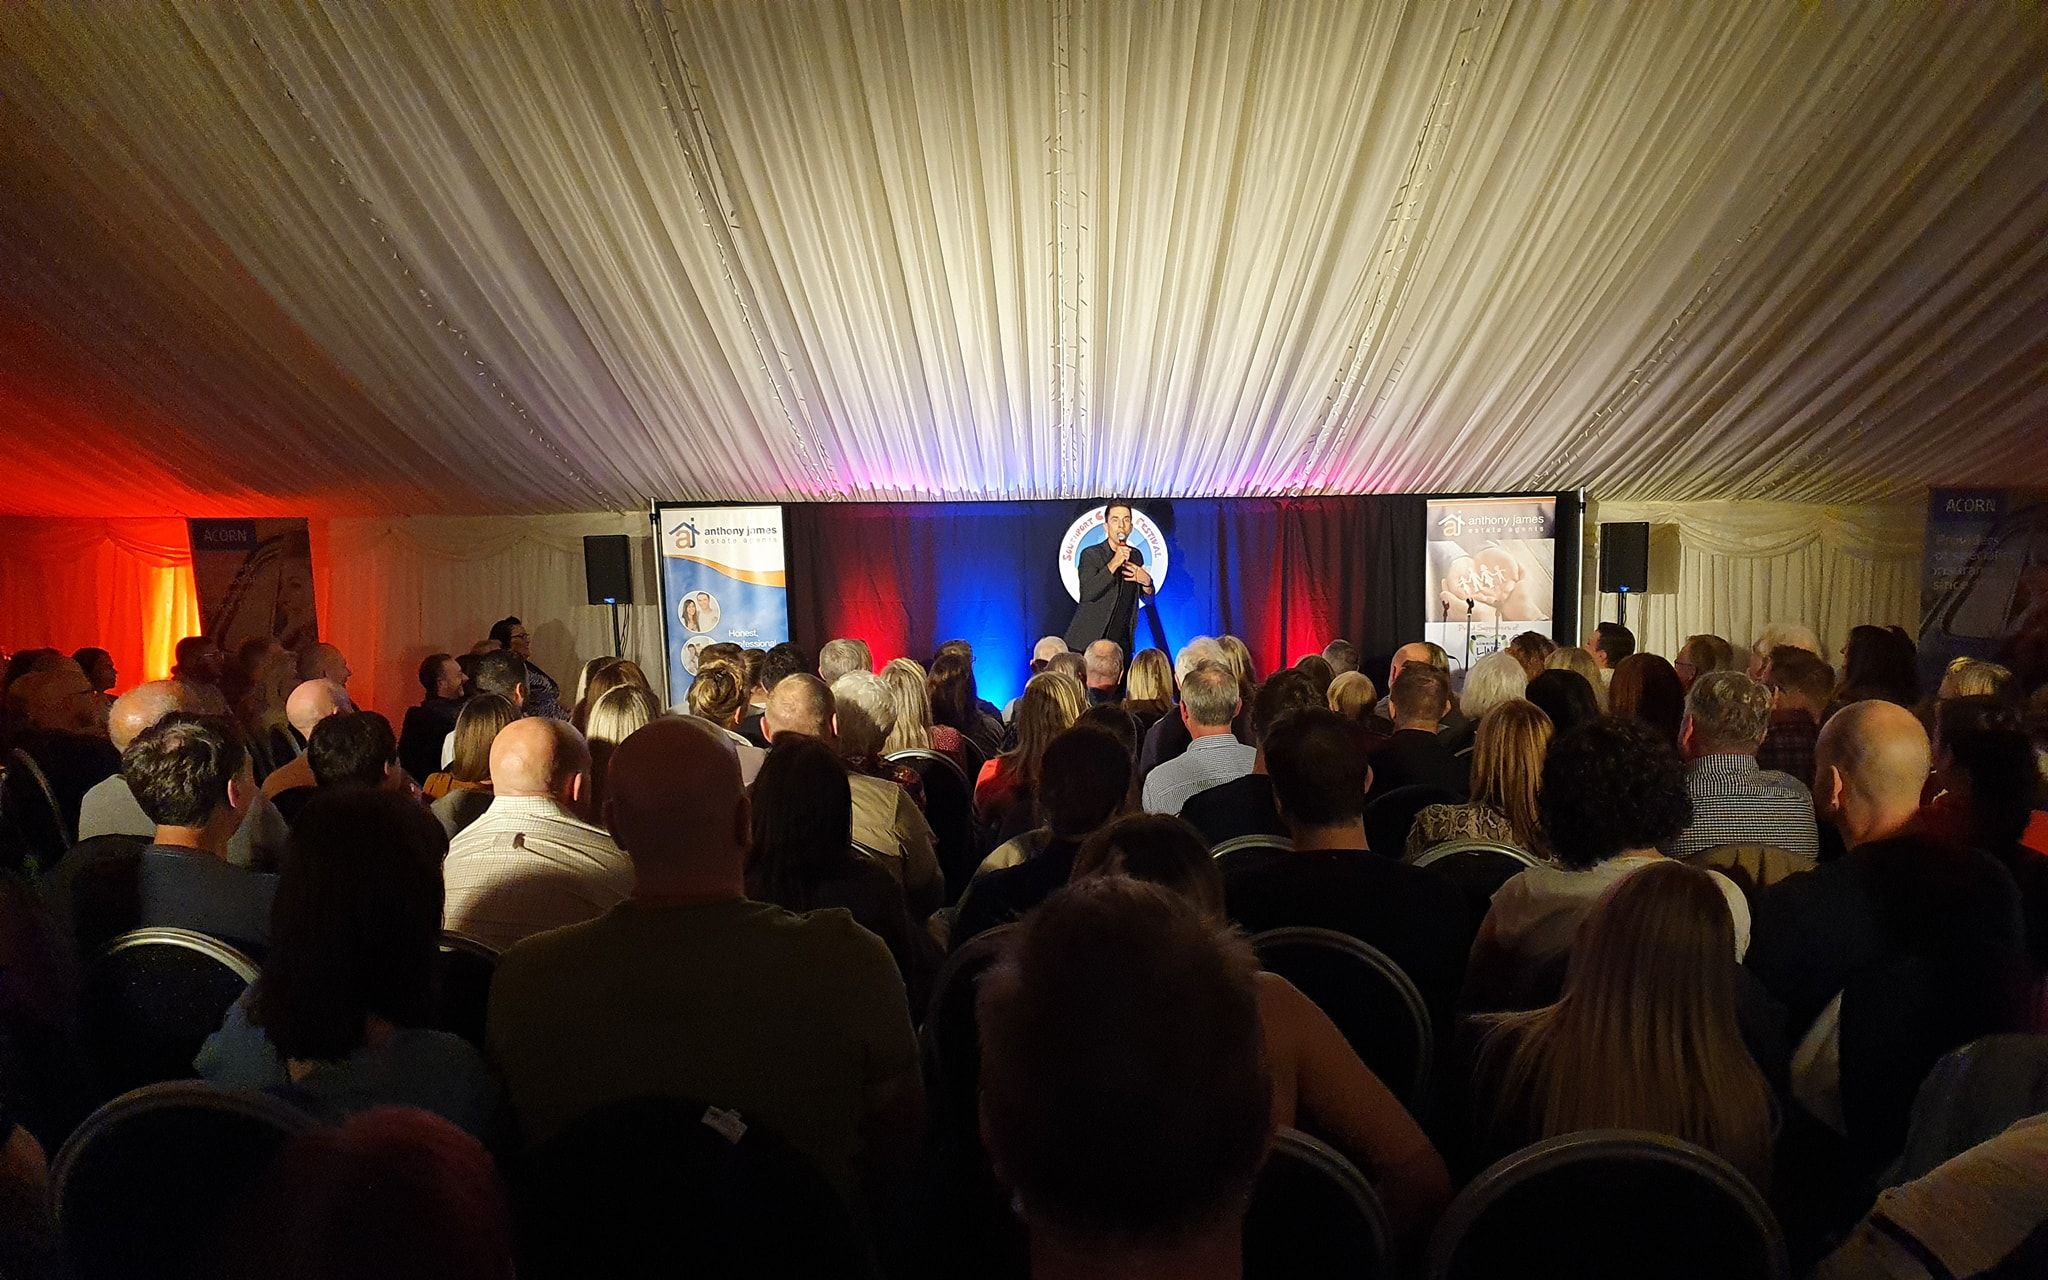 Russel Kane performs at Southport Comedy Festival in a marquee provided by Elite Marquees